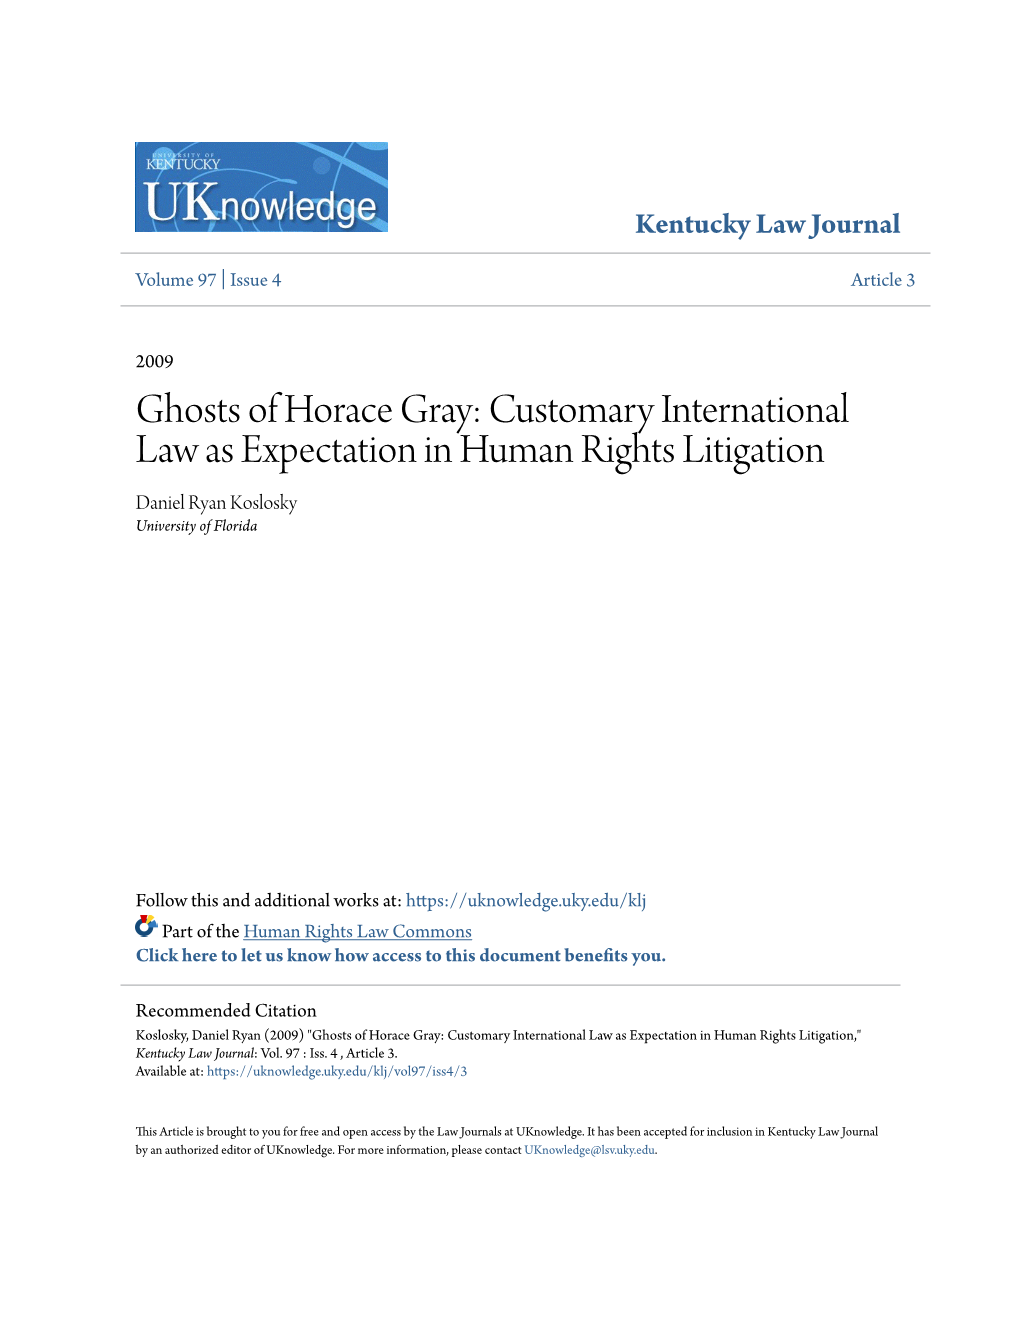 Ghosts of Horace Gray: Customary International Law As Expectation in Human Rights Litigation Daniel Ryan Koslosky University of Florida